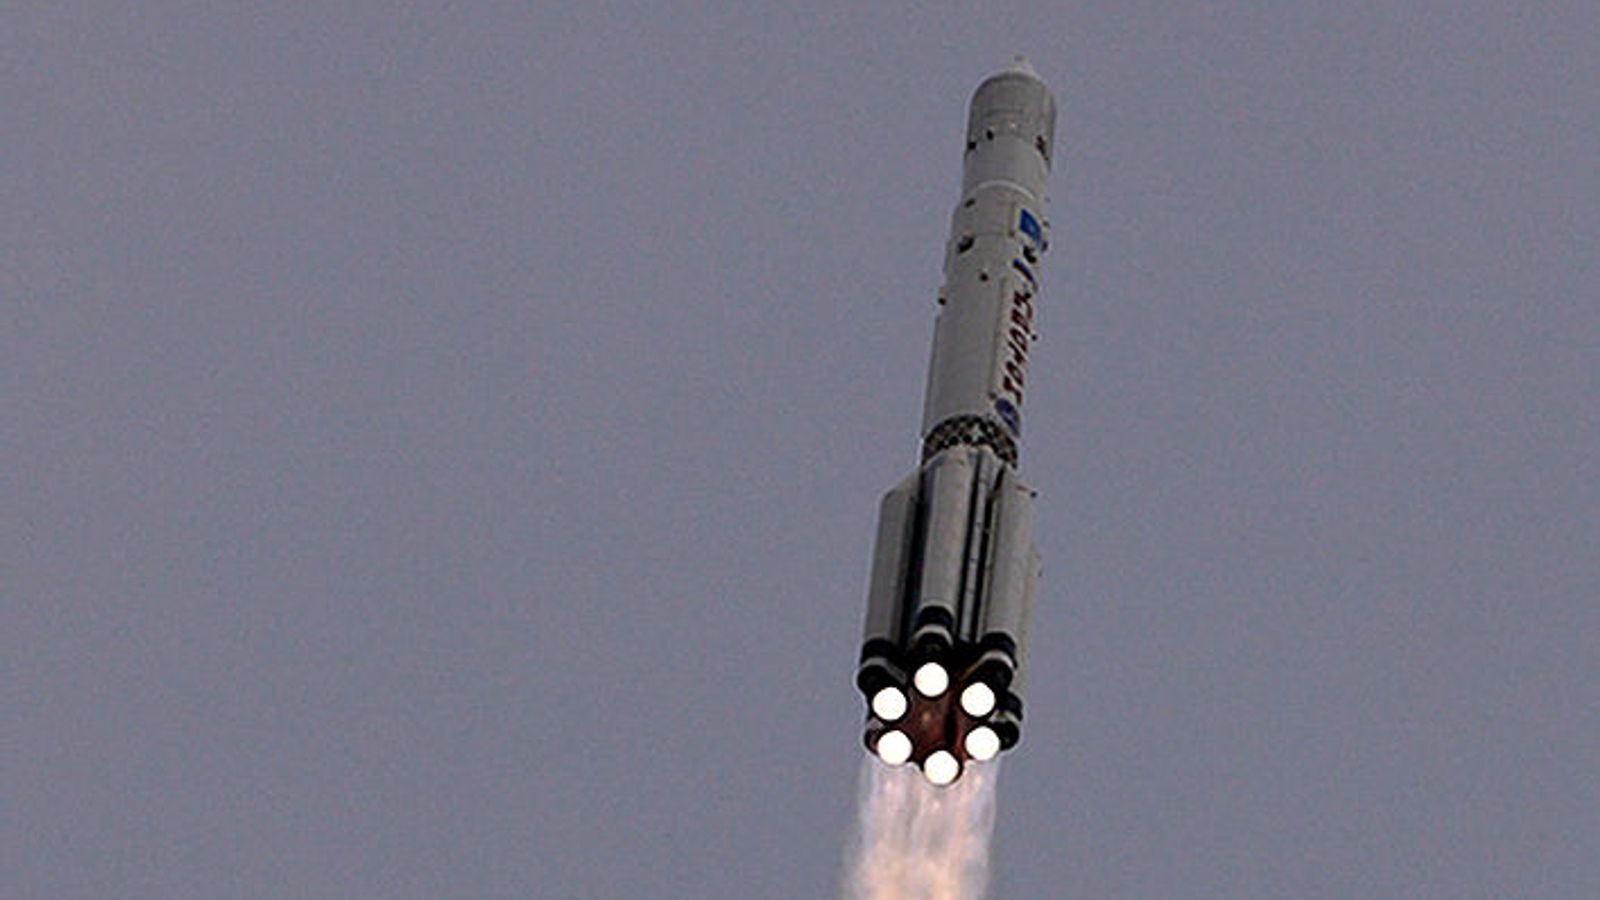 Russian satellite test had 'characteristics of a weapon', says UK